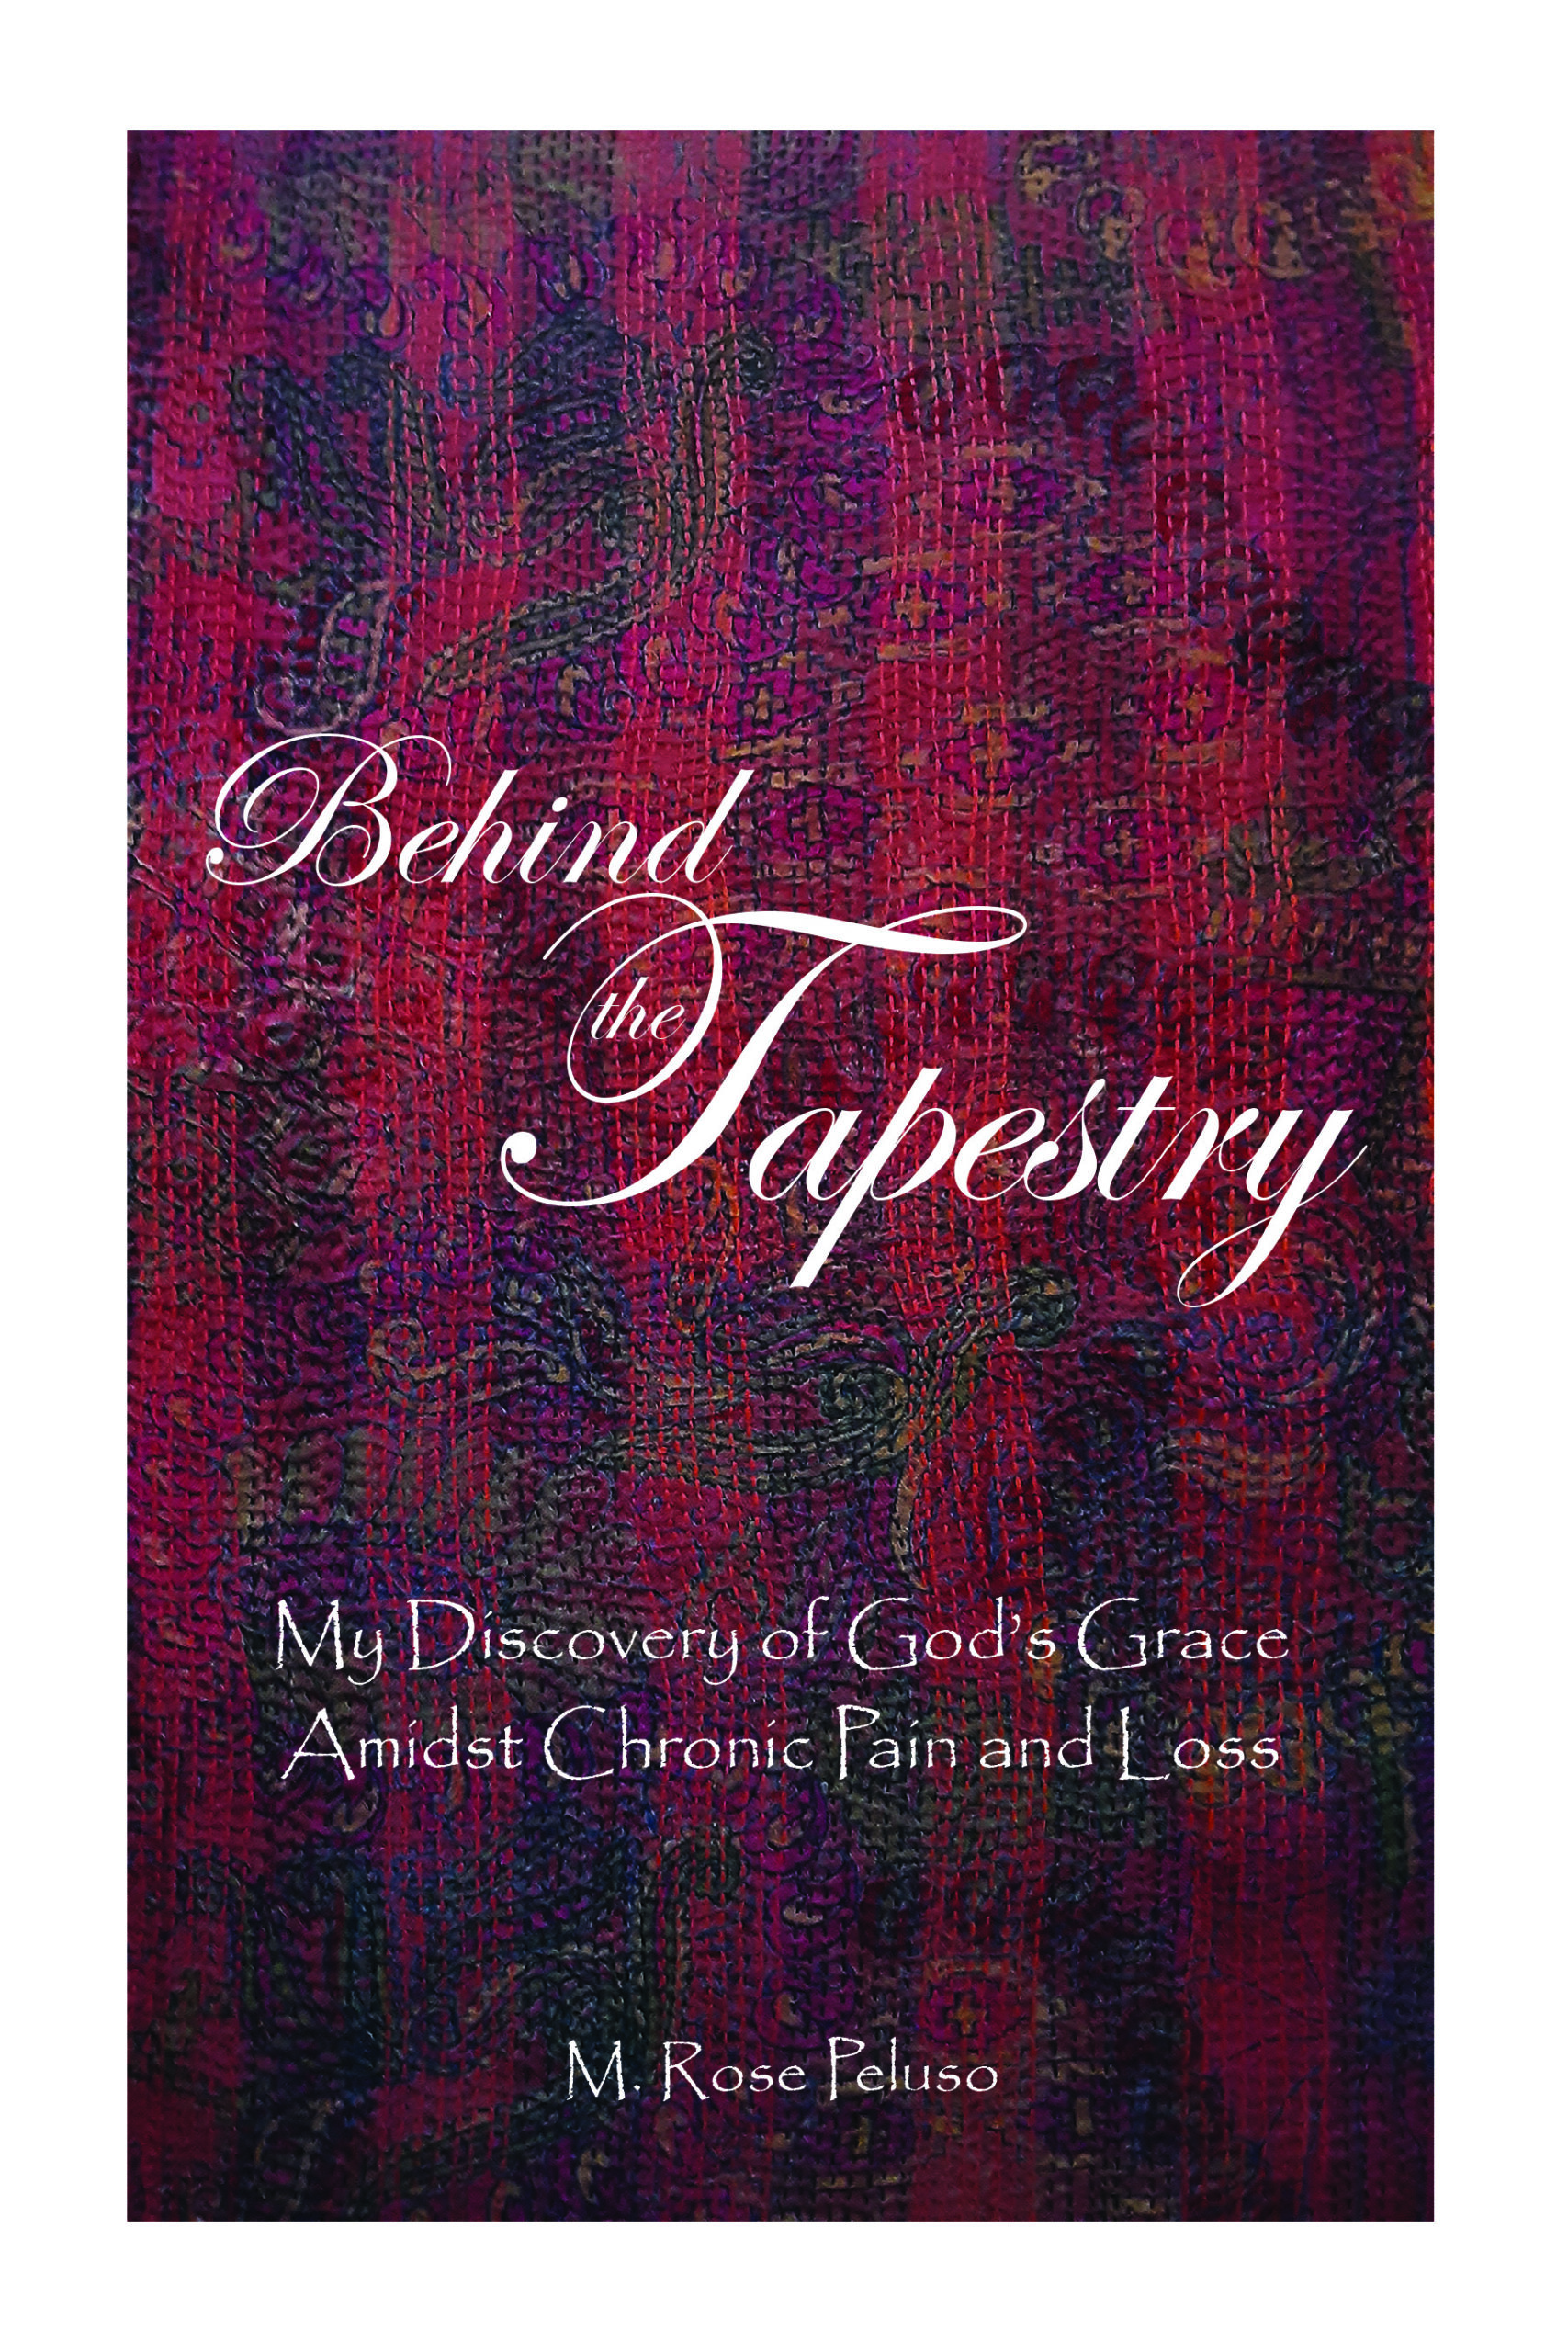 Behind the Tapestry: My Discovery of God’s Grace Amidst Chronic Pain and Loss by M. Rose Peluso